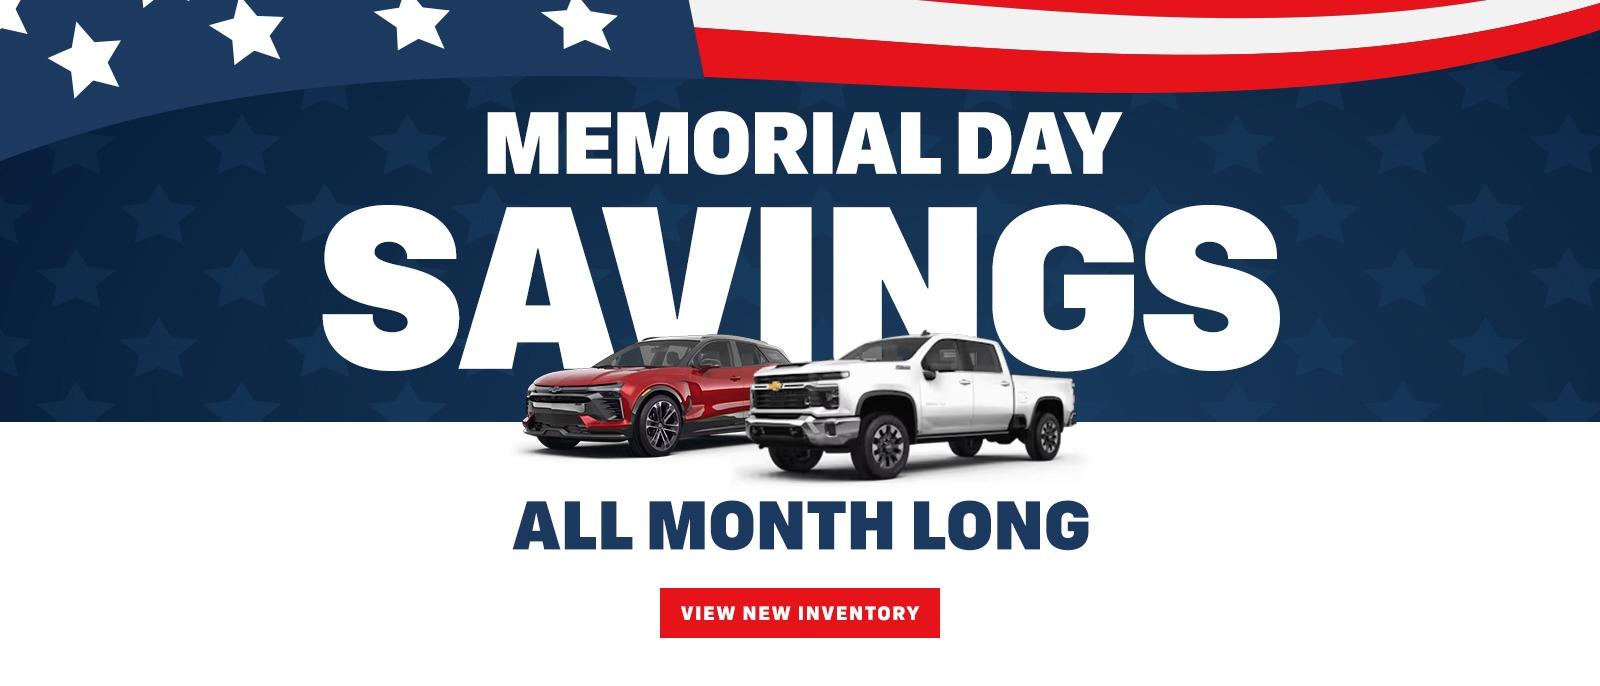 Memorial Day Sales Event All Month Long